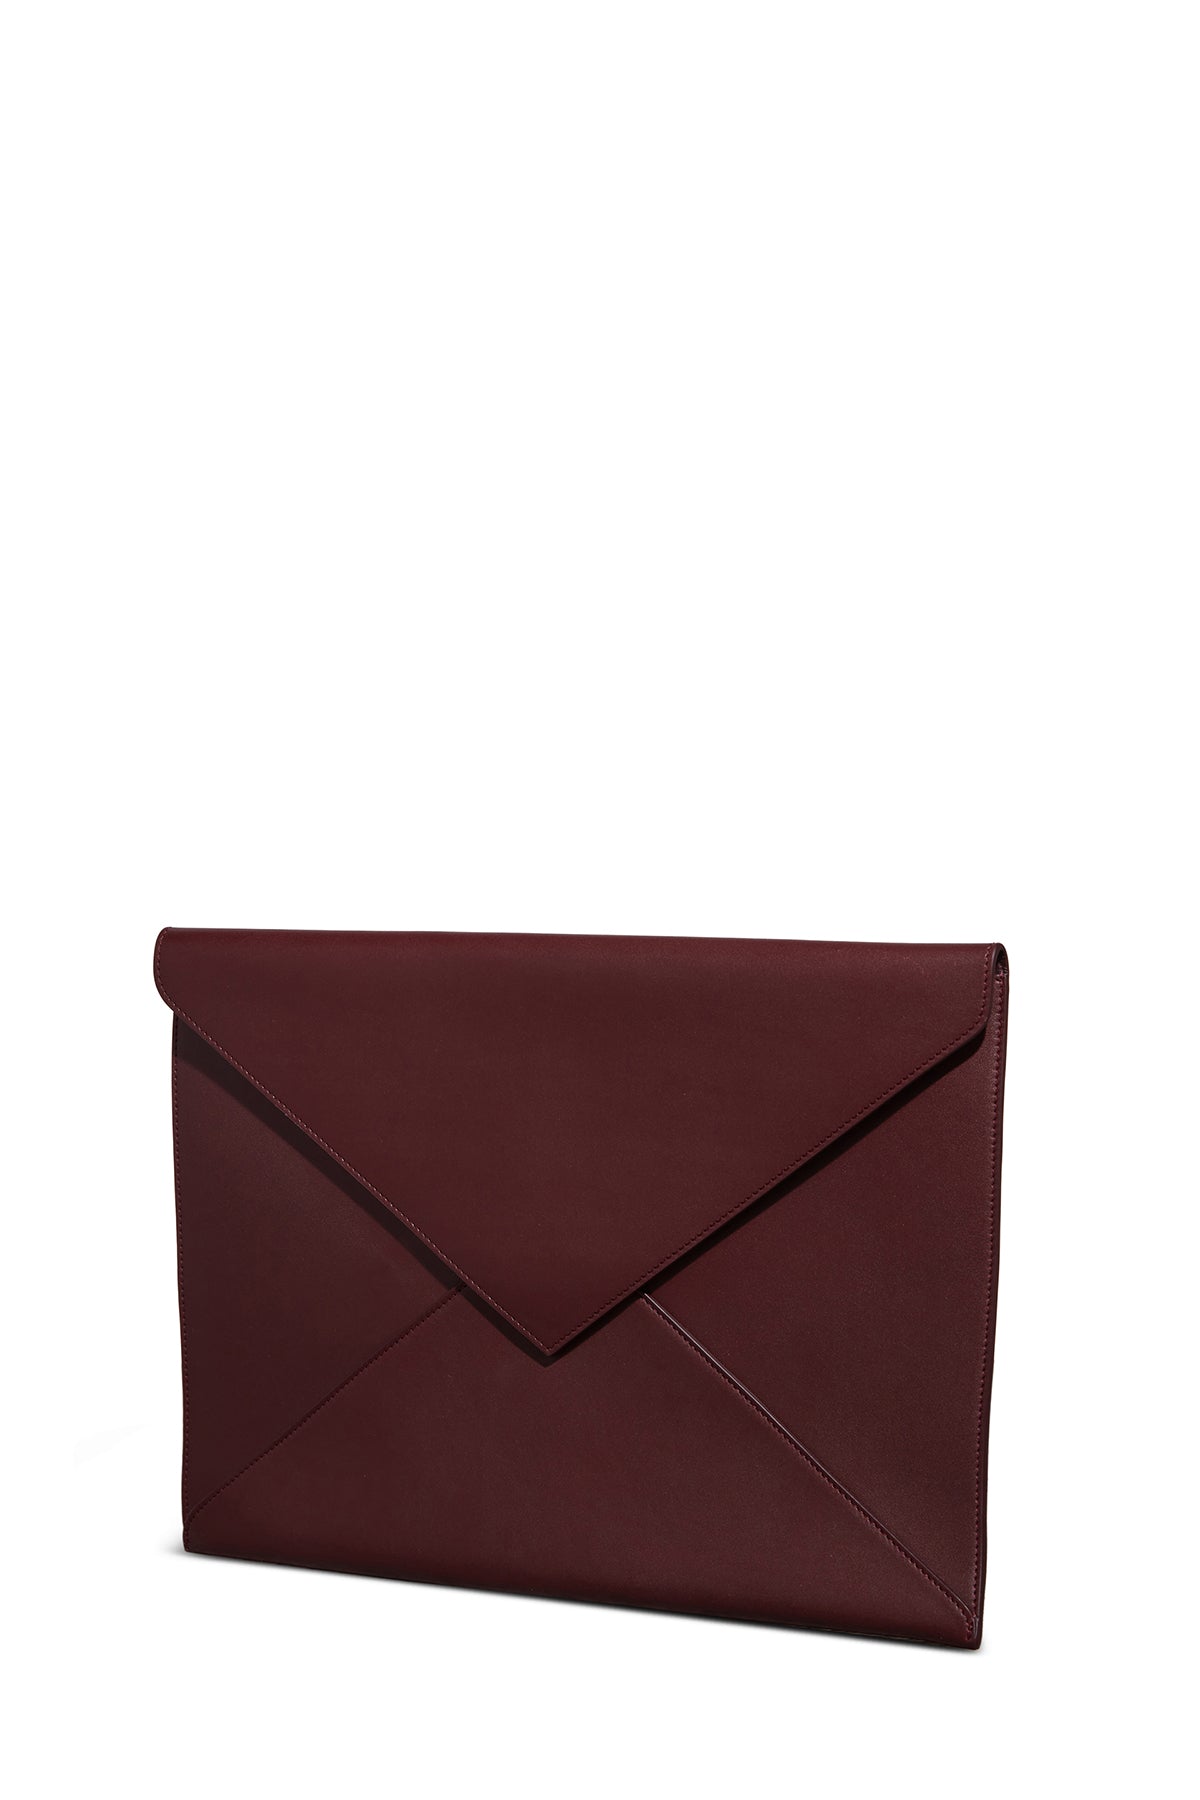 Large Envelope in Bordeaux Nappa Leather